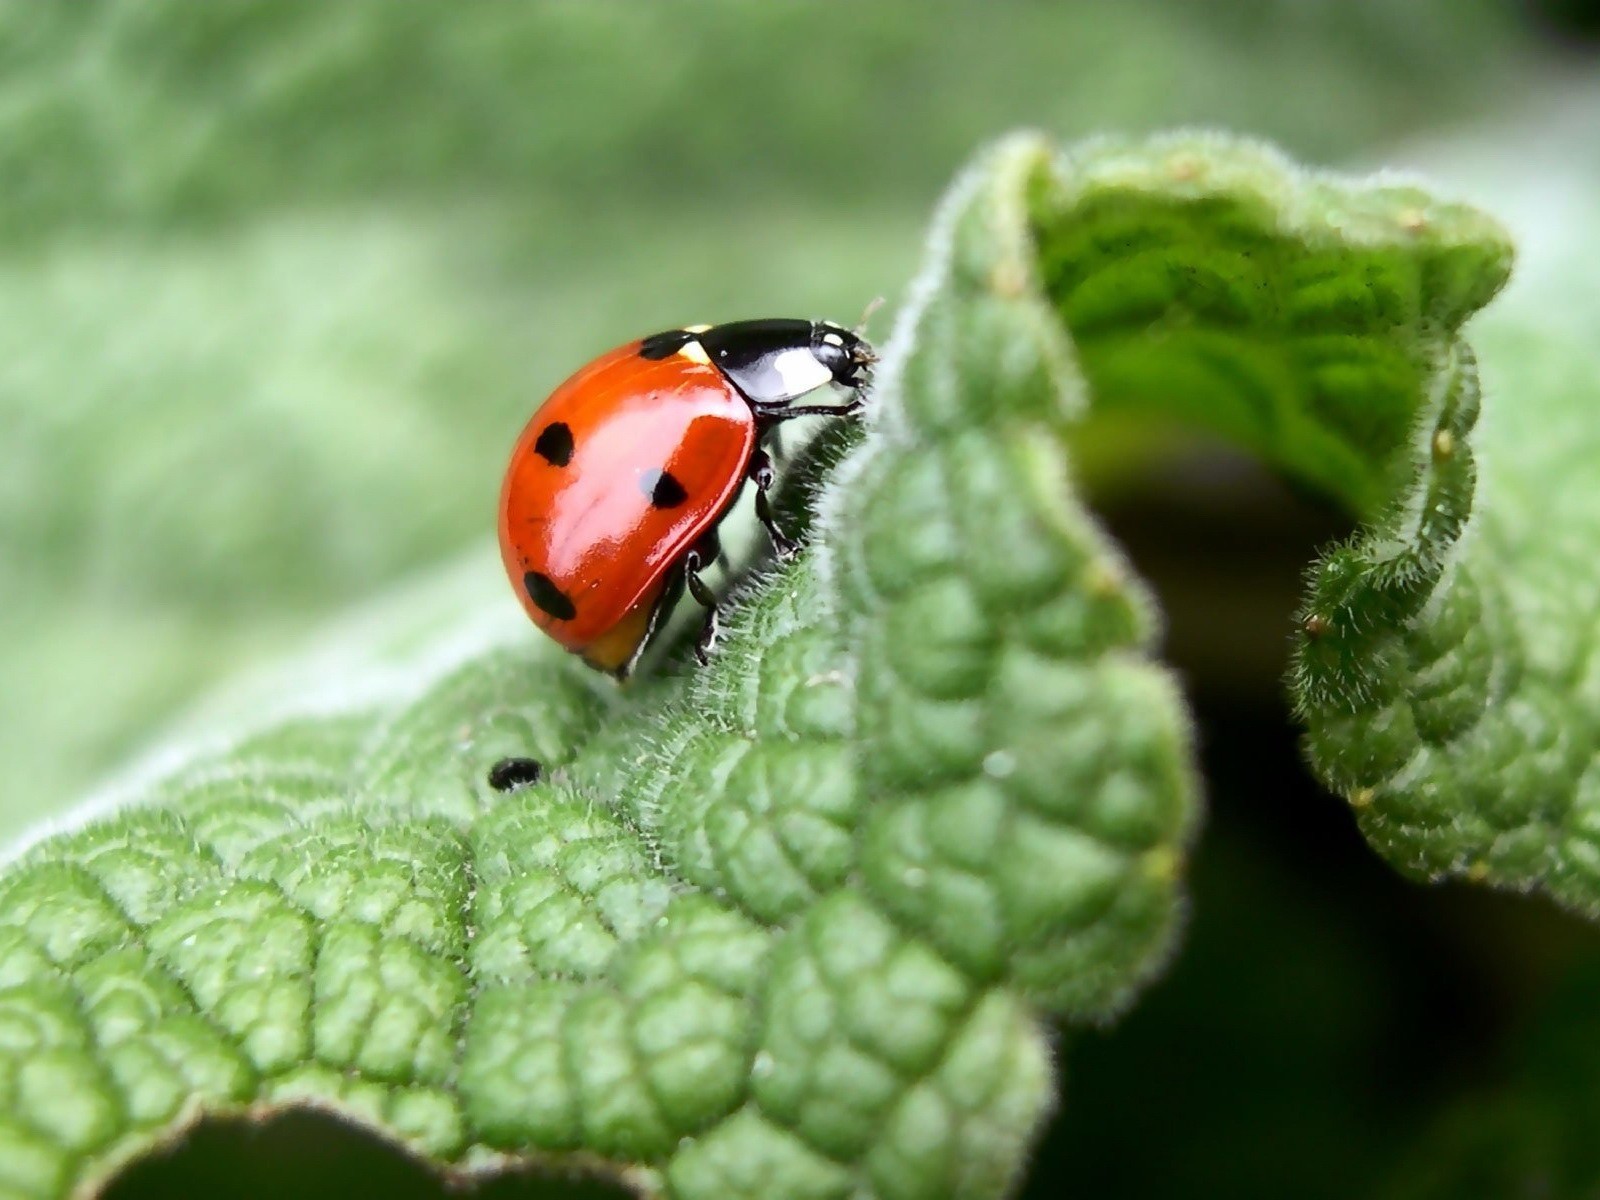 Of Red Bug More Animals Photography Image And Wallpaper